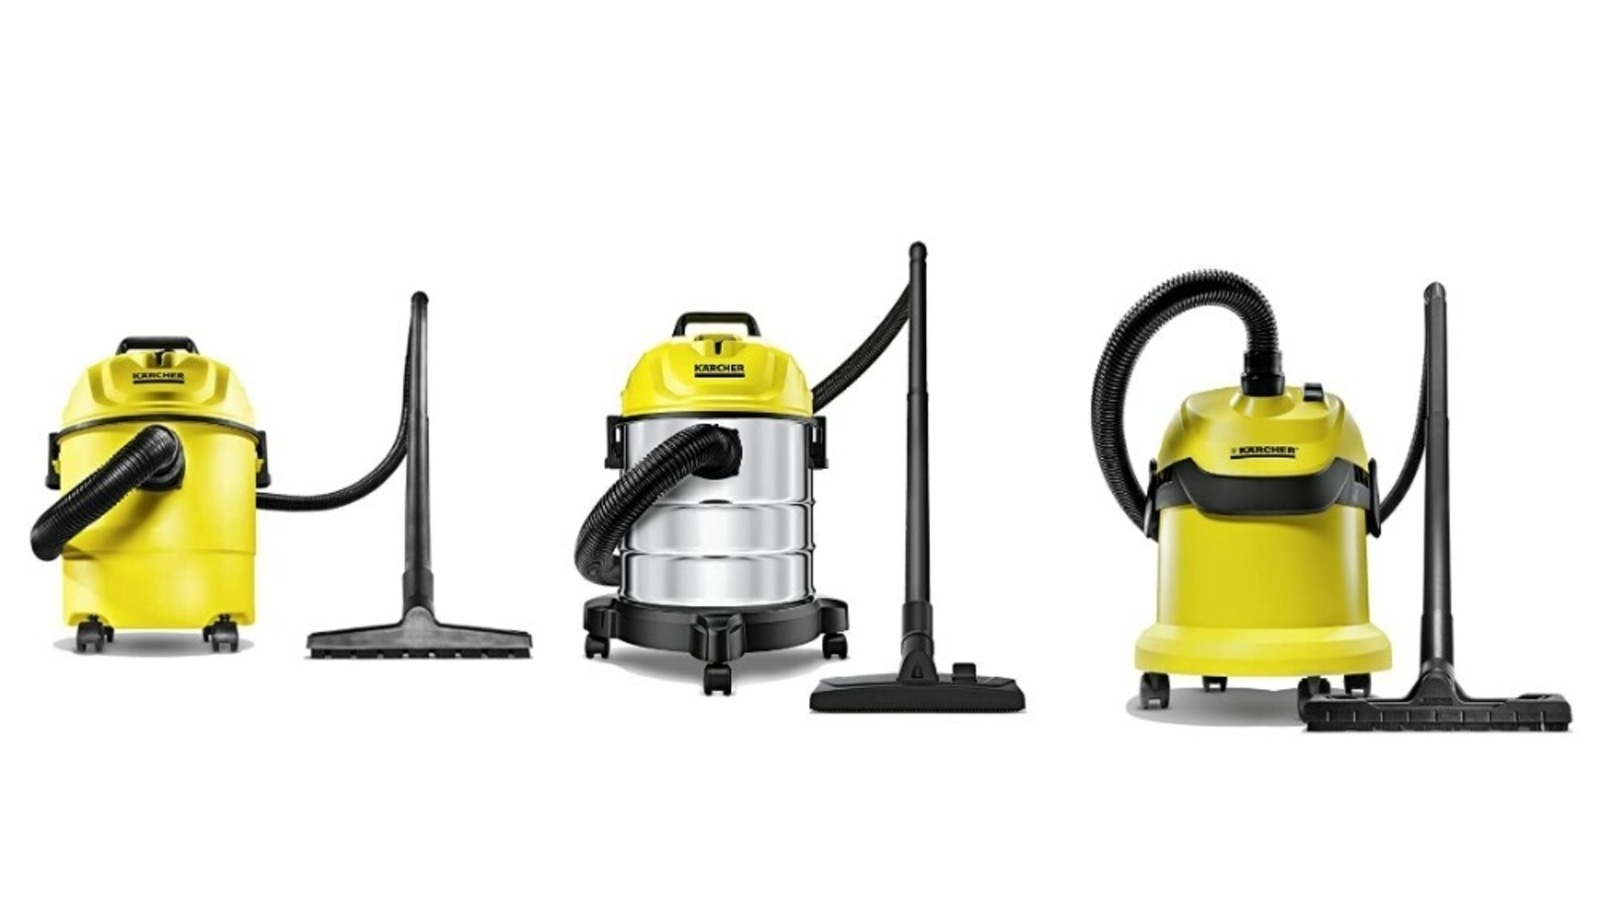  Karcher WD3 EU Wet and Dry Vacuum Cleaner, 1000 Watts  Powerful Suction, 17 L Capacity, Blower Function, Easy Filter Removal for  Home and Garden Cleaning (Yellow/Black)  Review Analysis